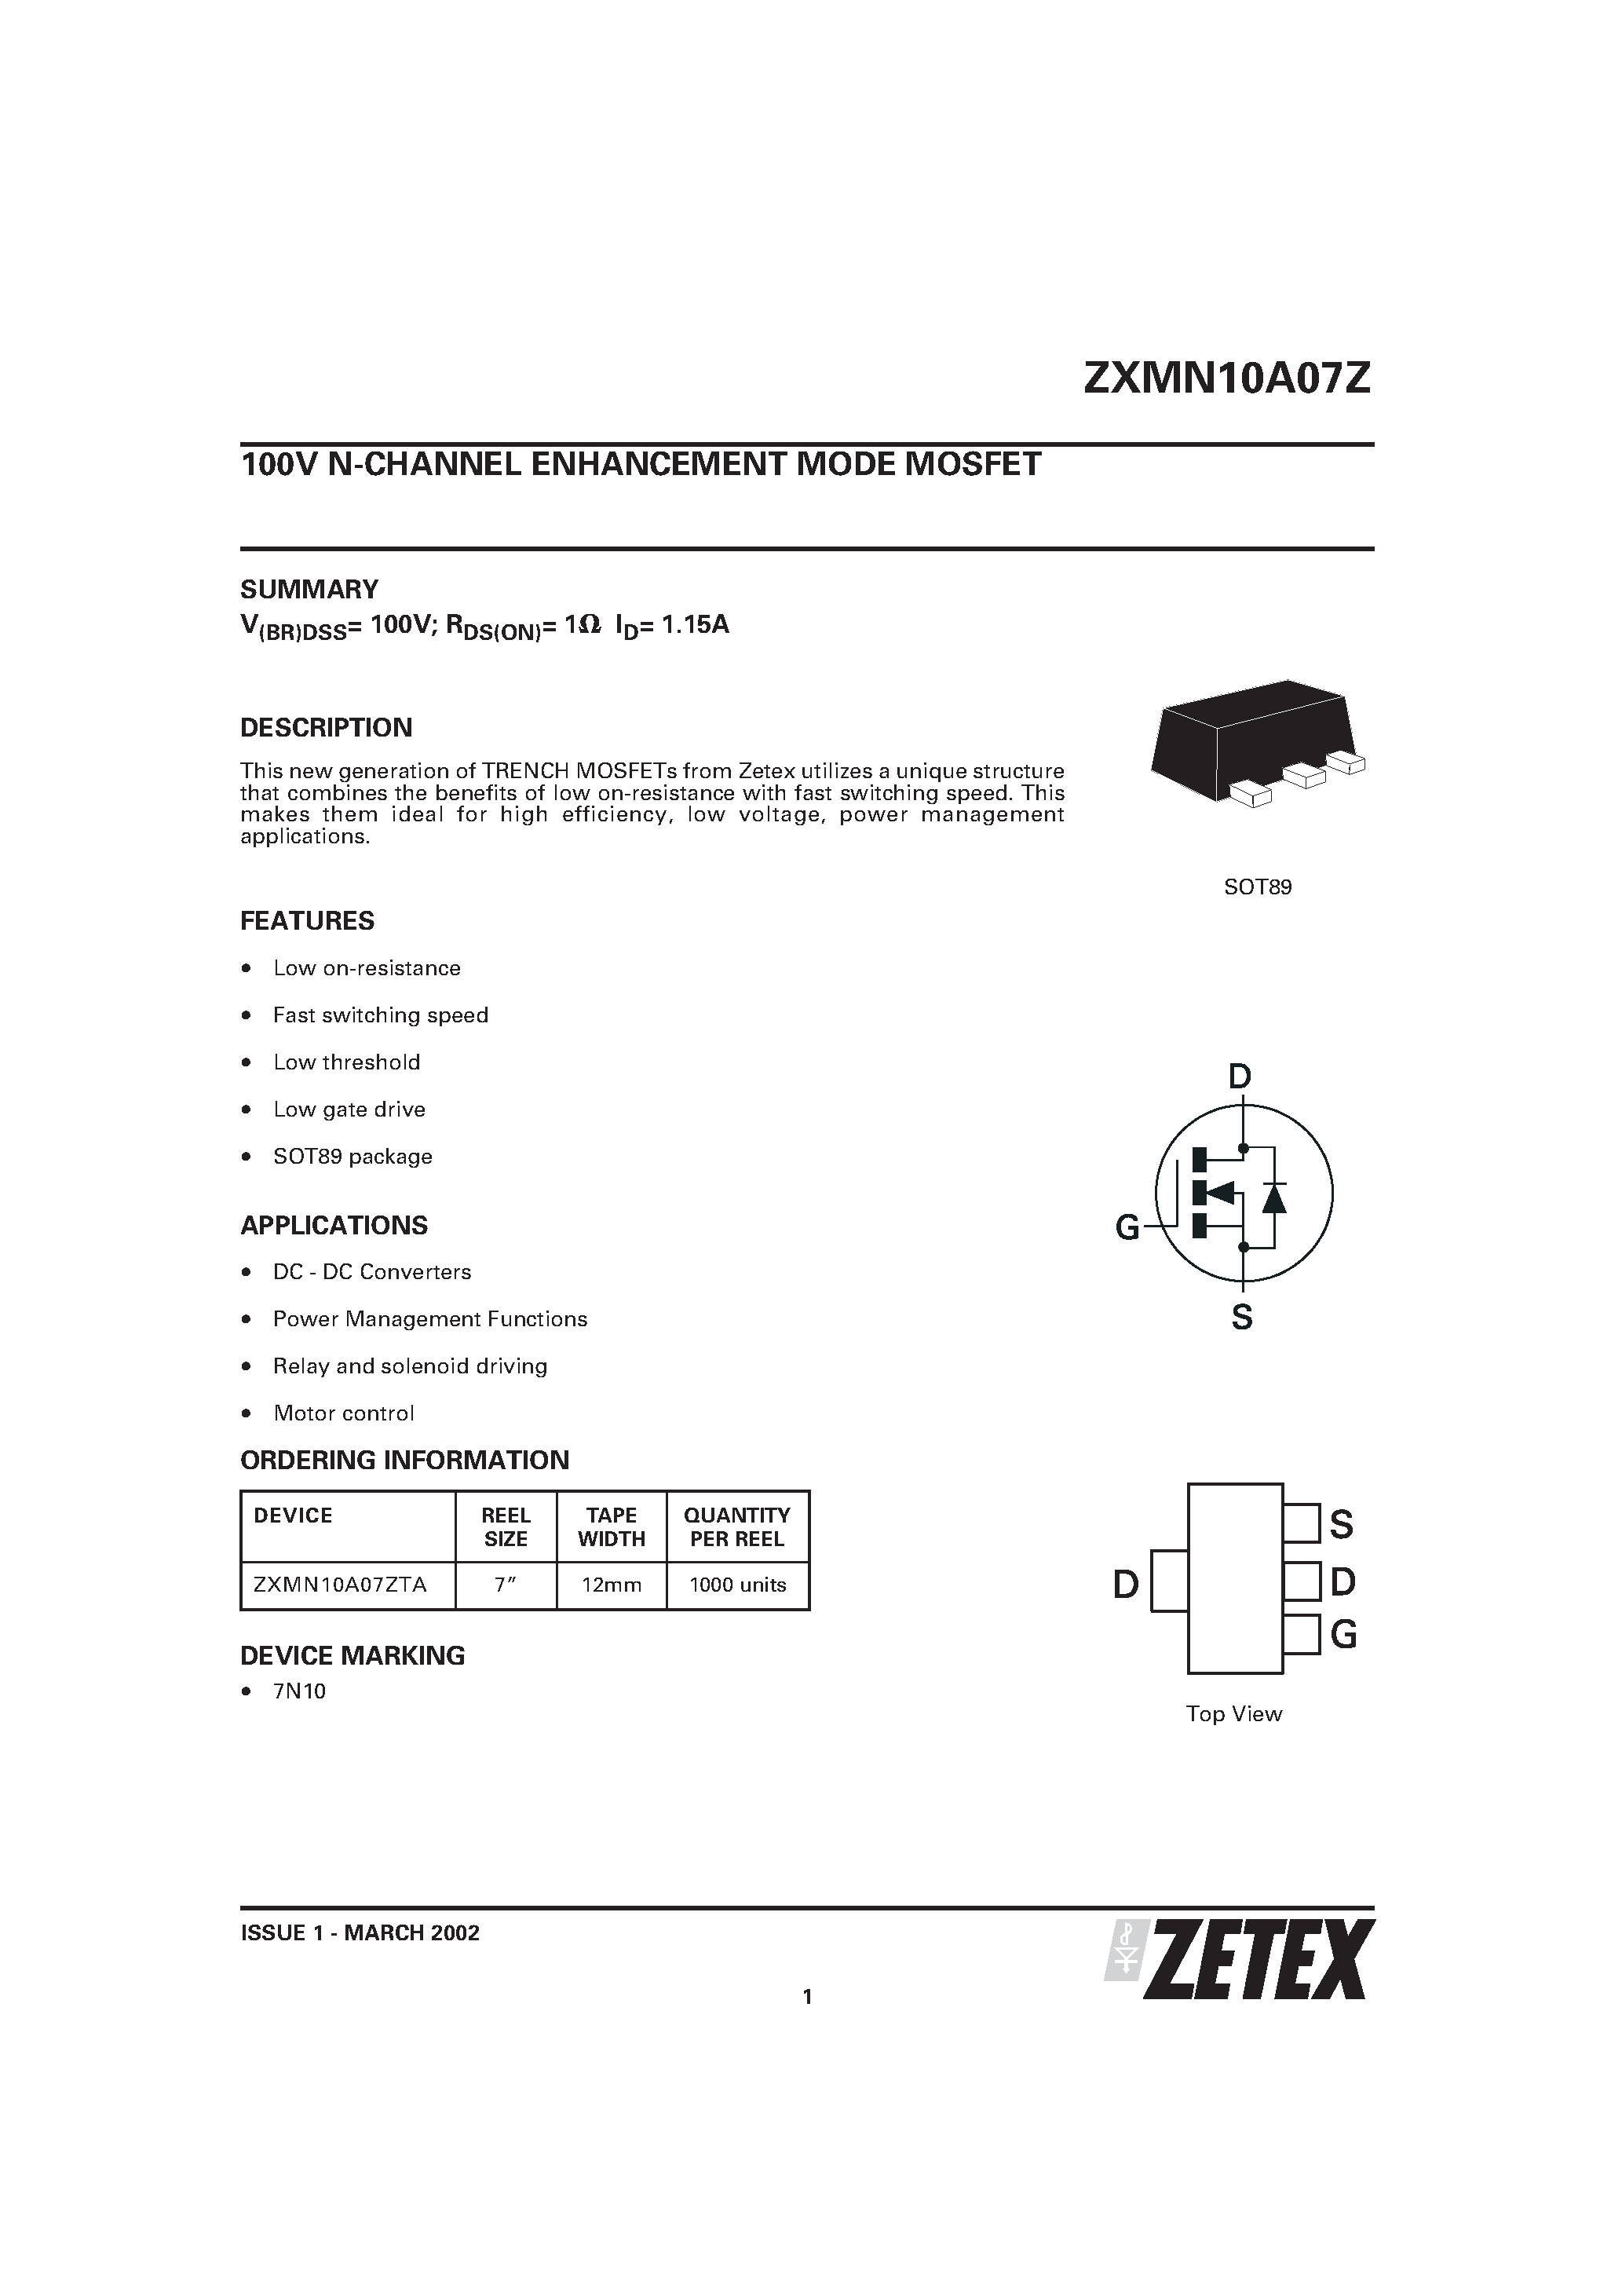 Datasheet ZXMN10A07Z - 100V N-CHANNEL ENHANCEMENT MODE MOSFET page 1